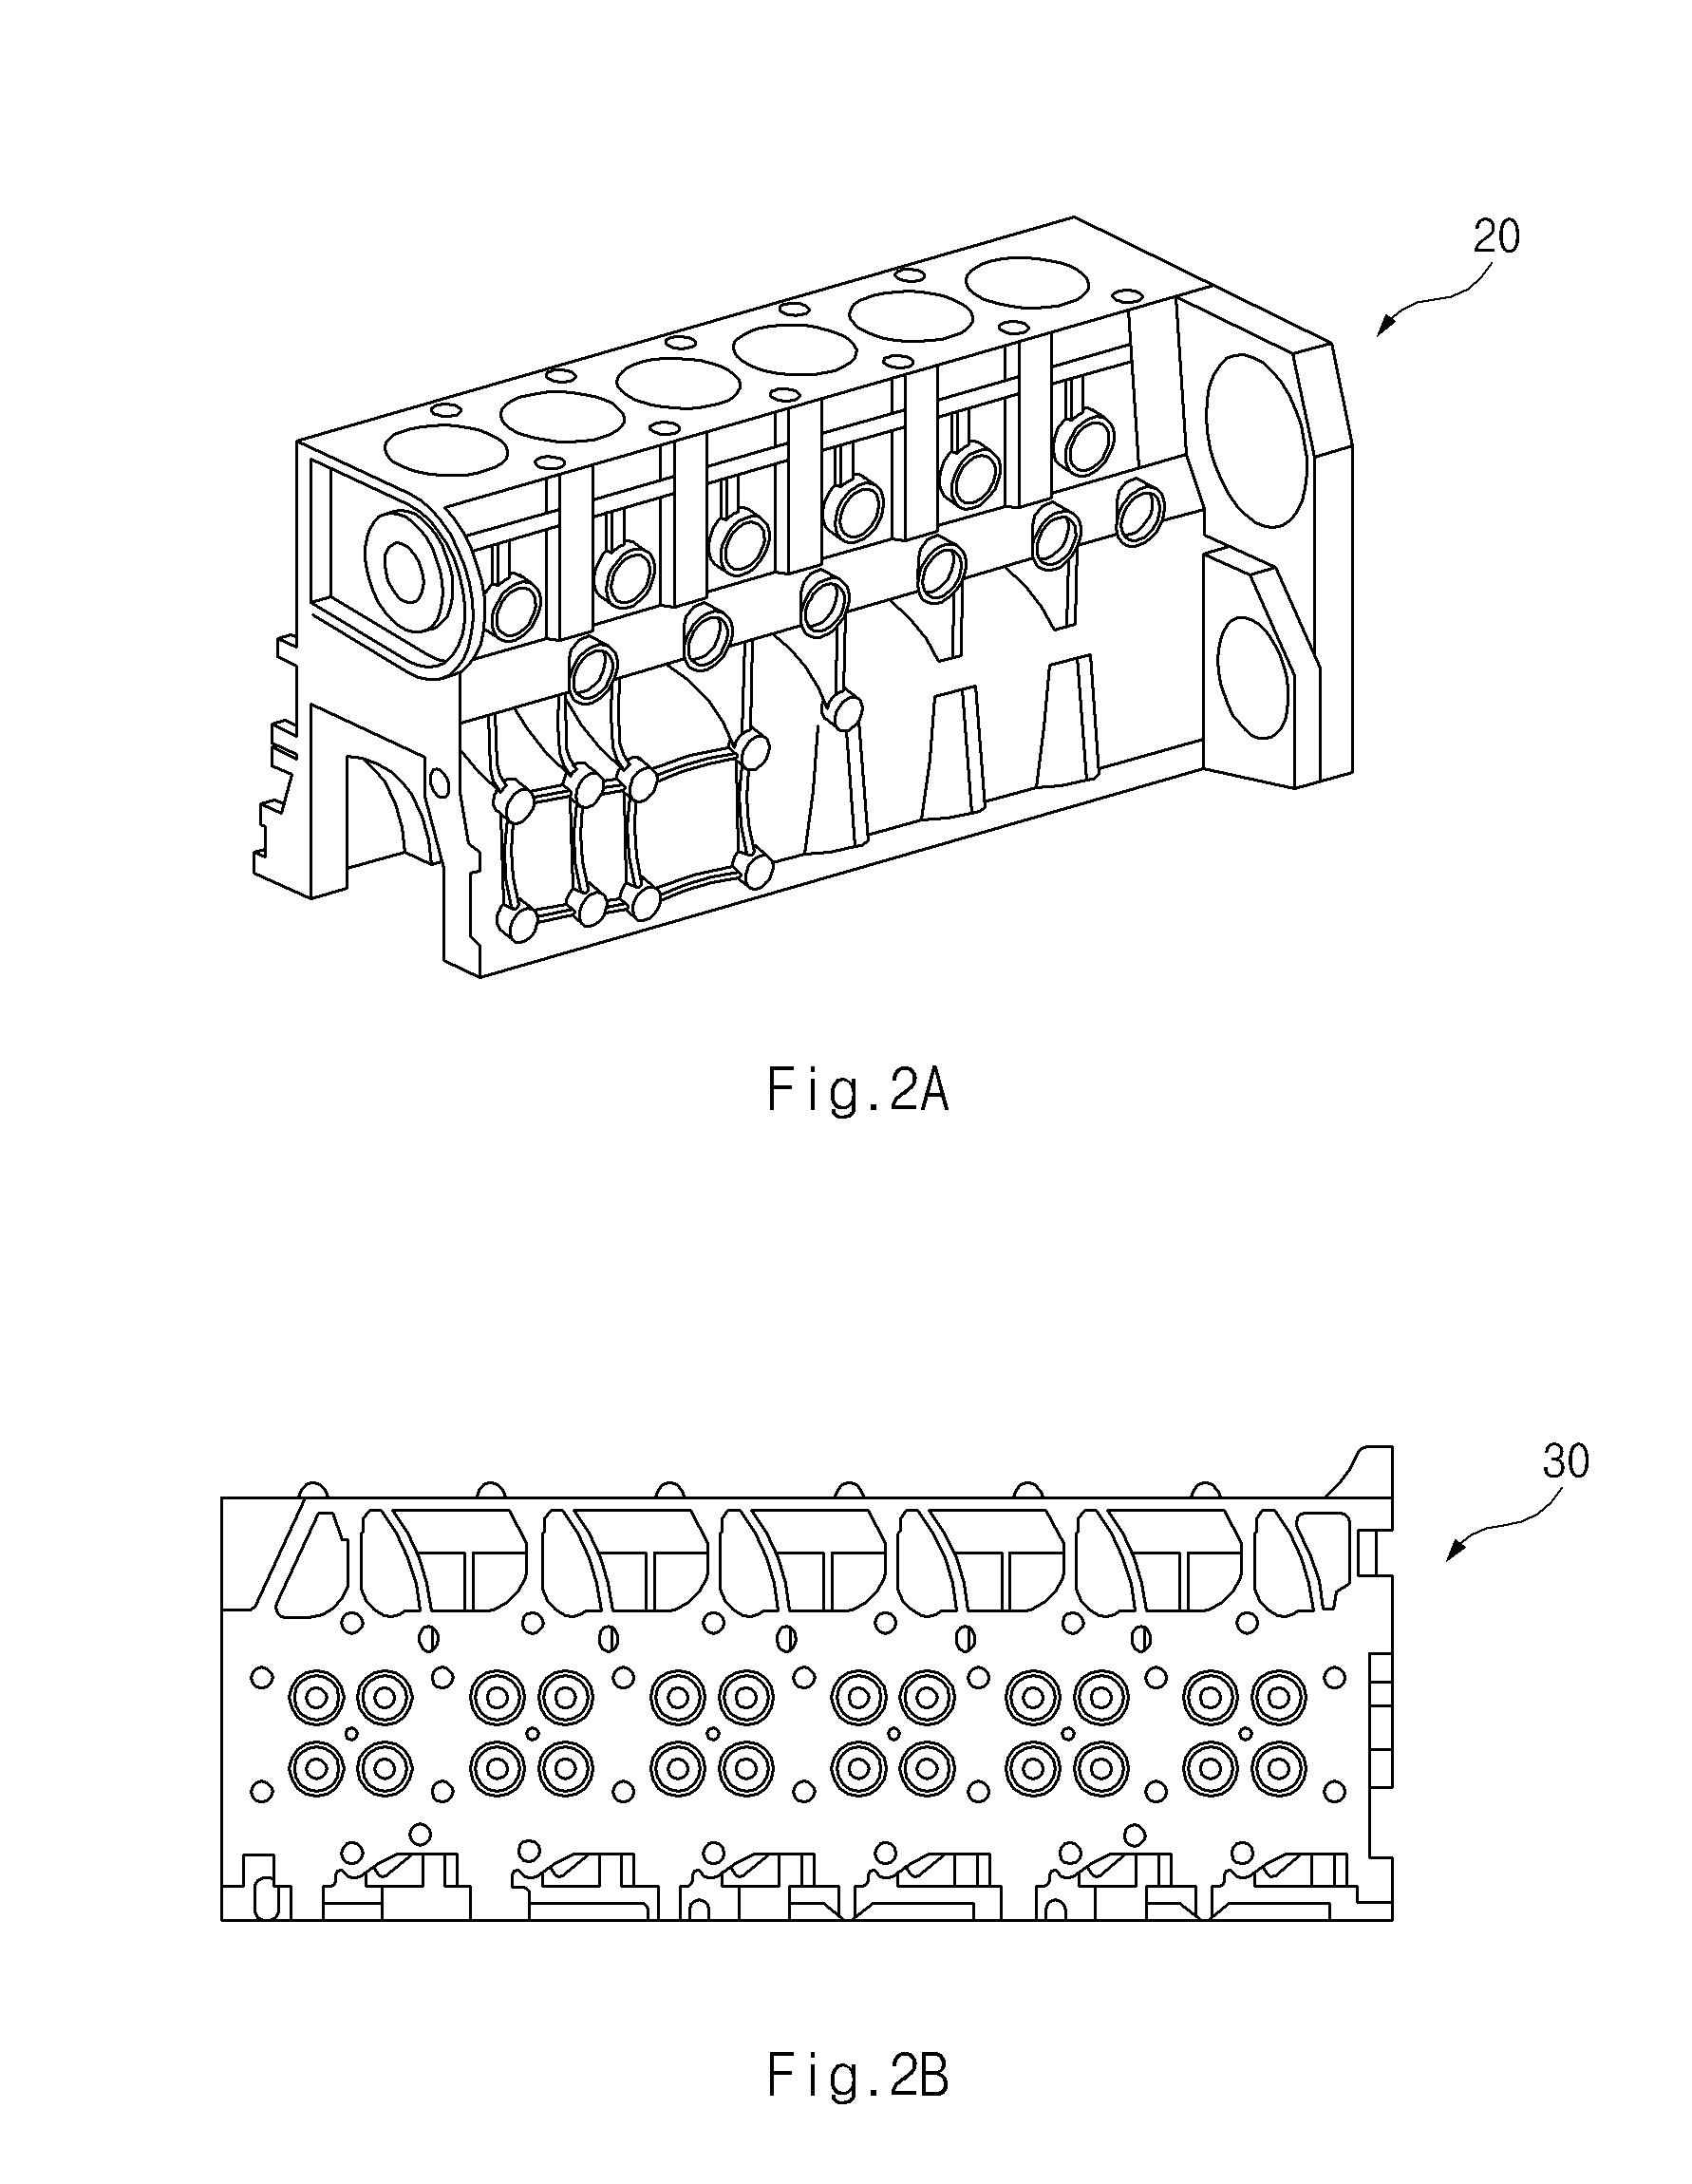 Method of inoculating magnesium on compacted graphite iron, and cylinder block and cylinder head manufactured by using the method